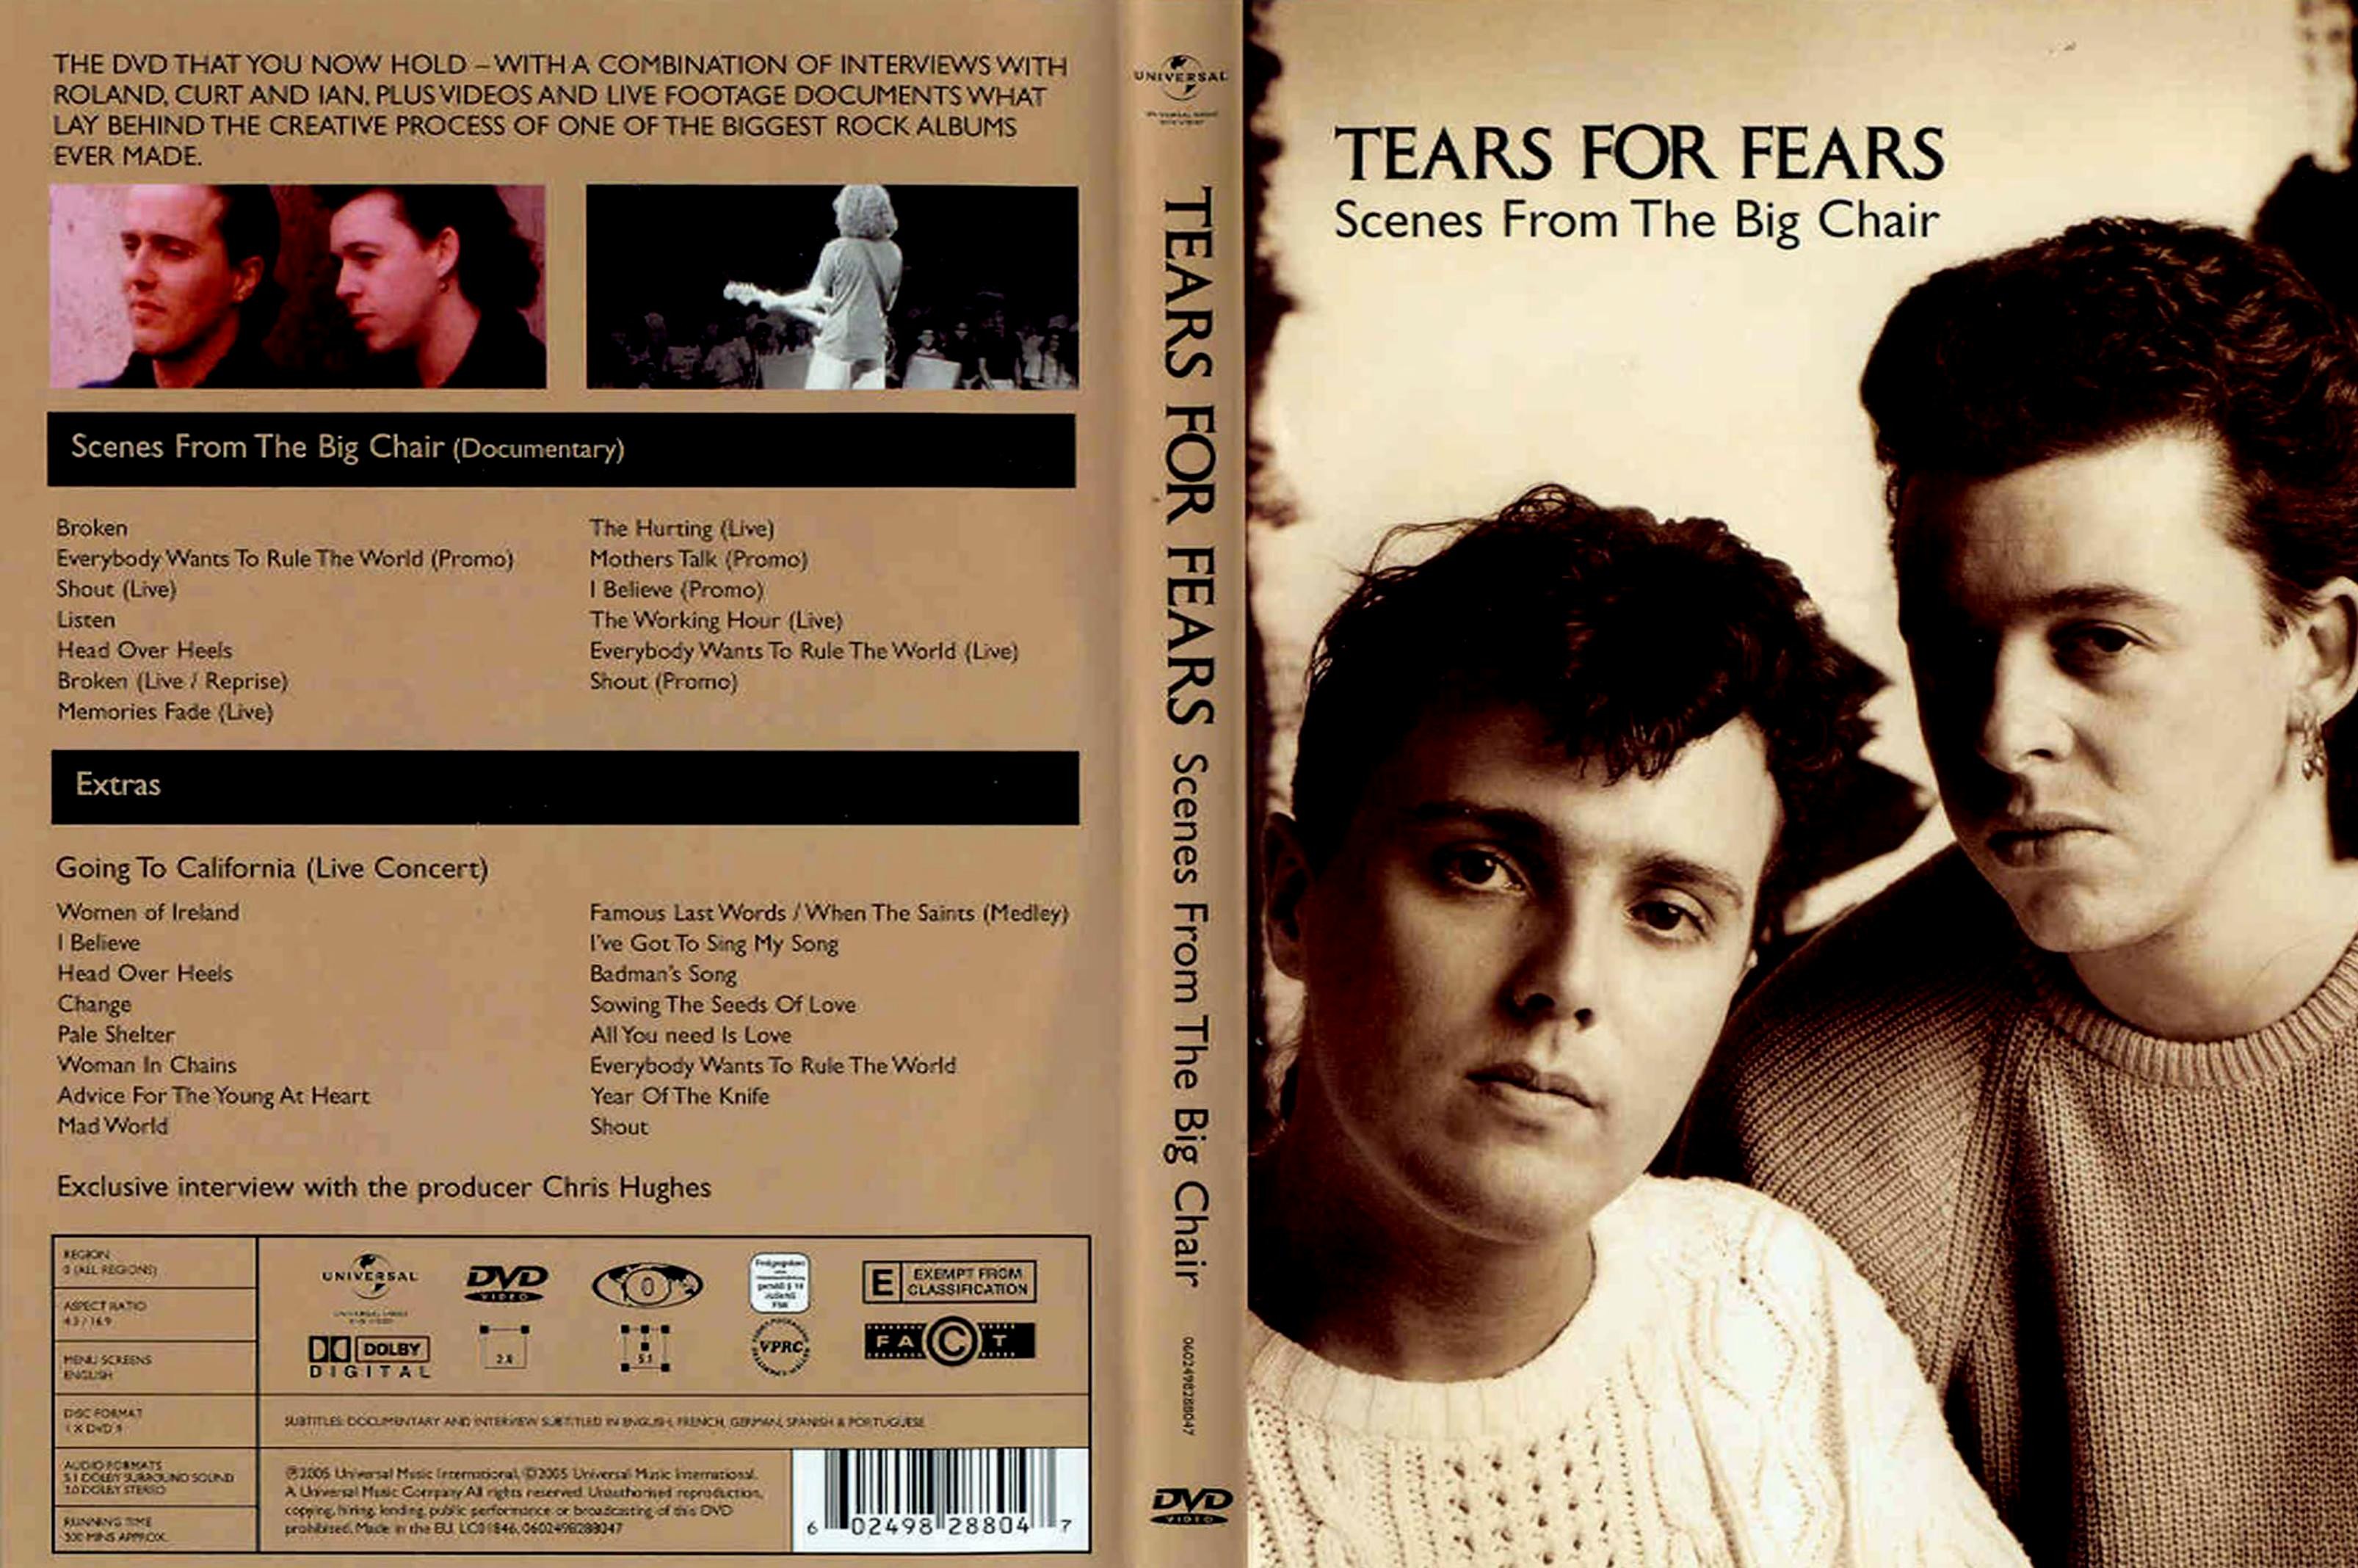 Jaquette DVD Tears for fear